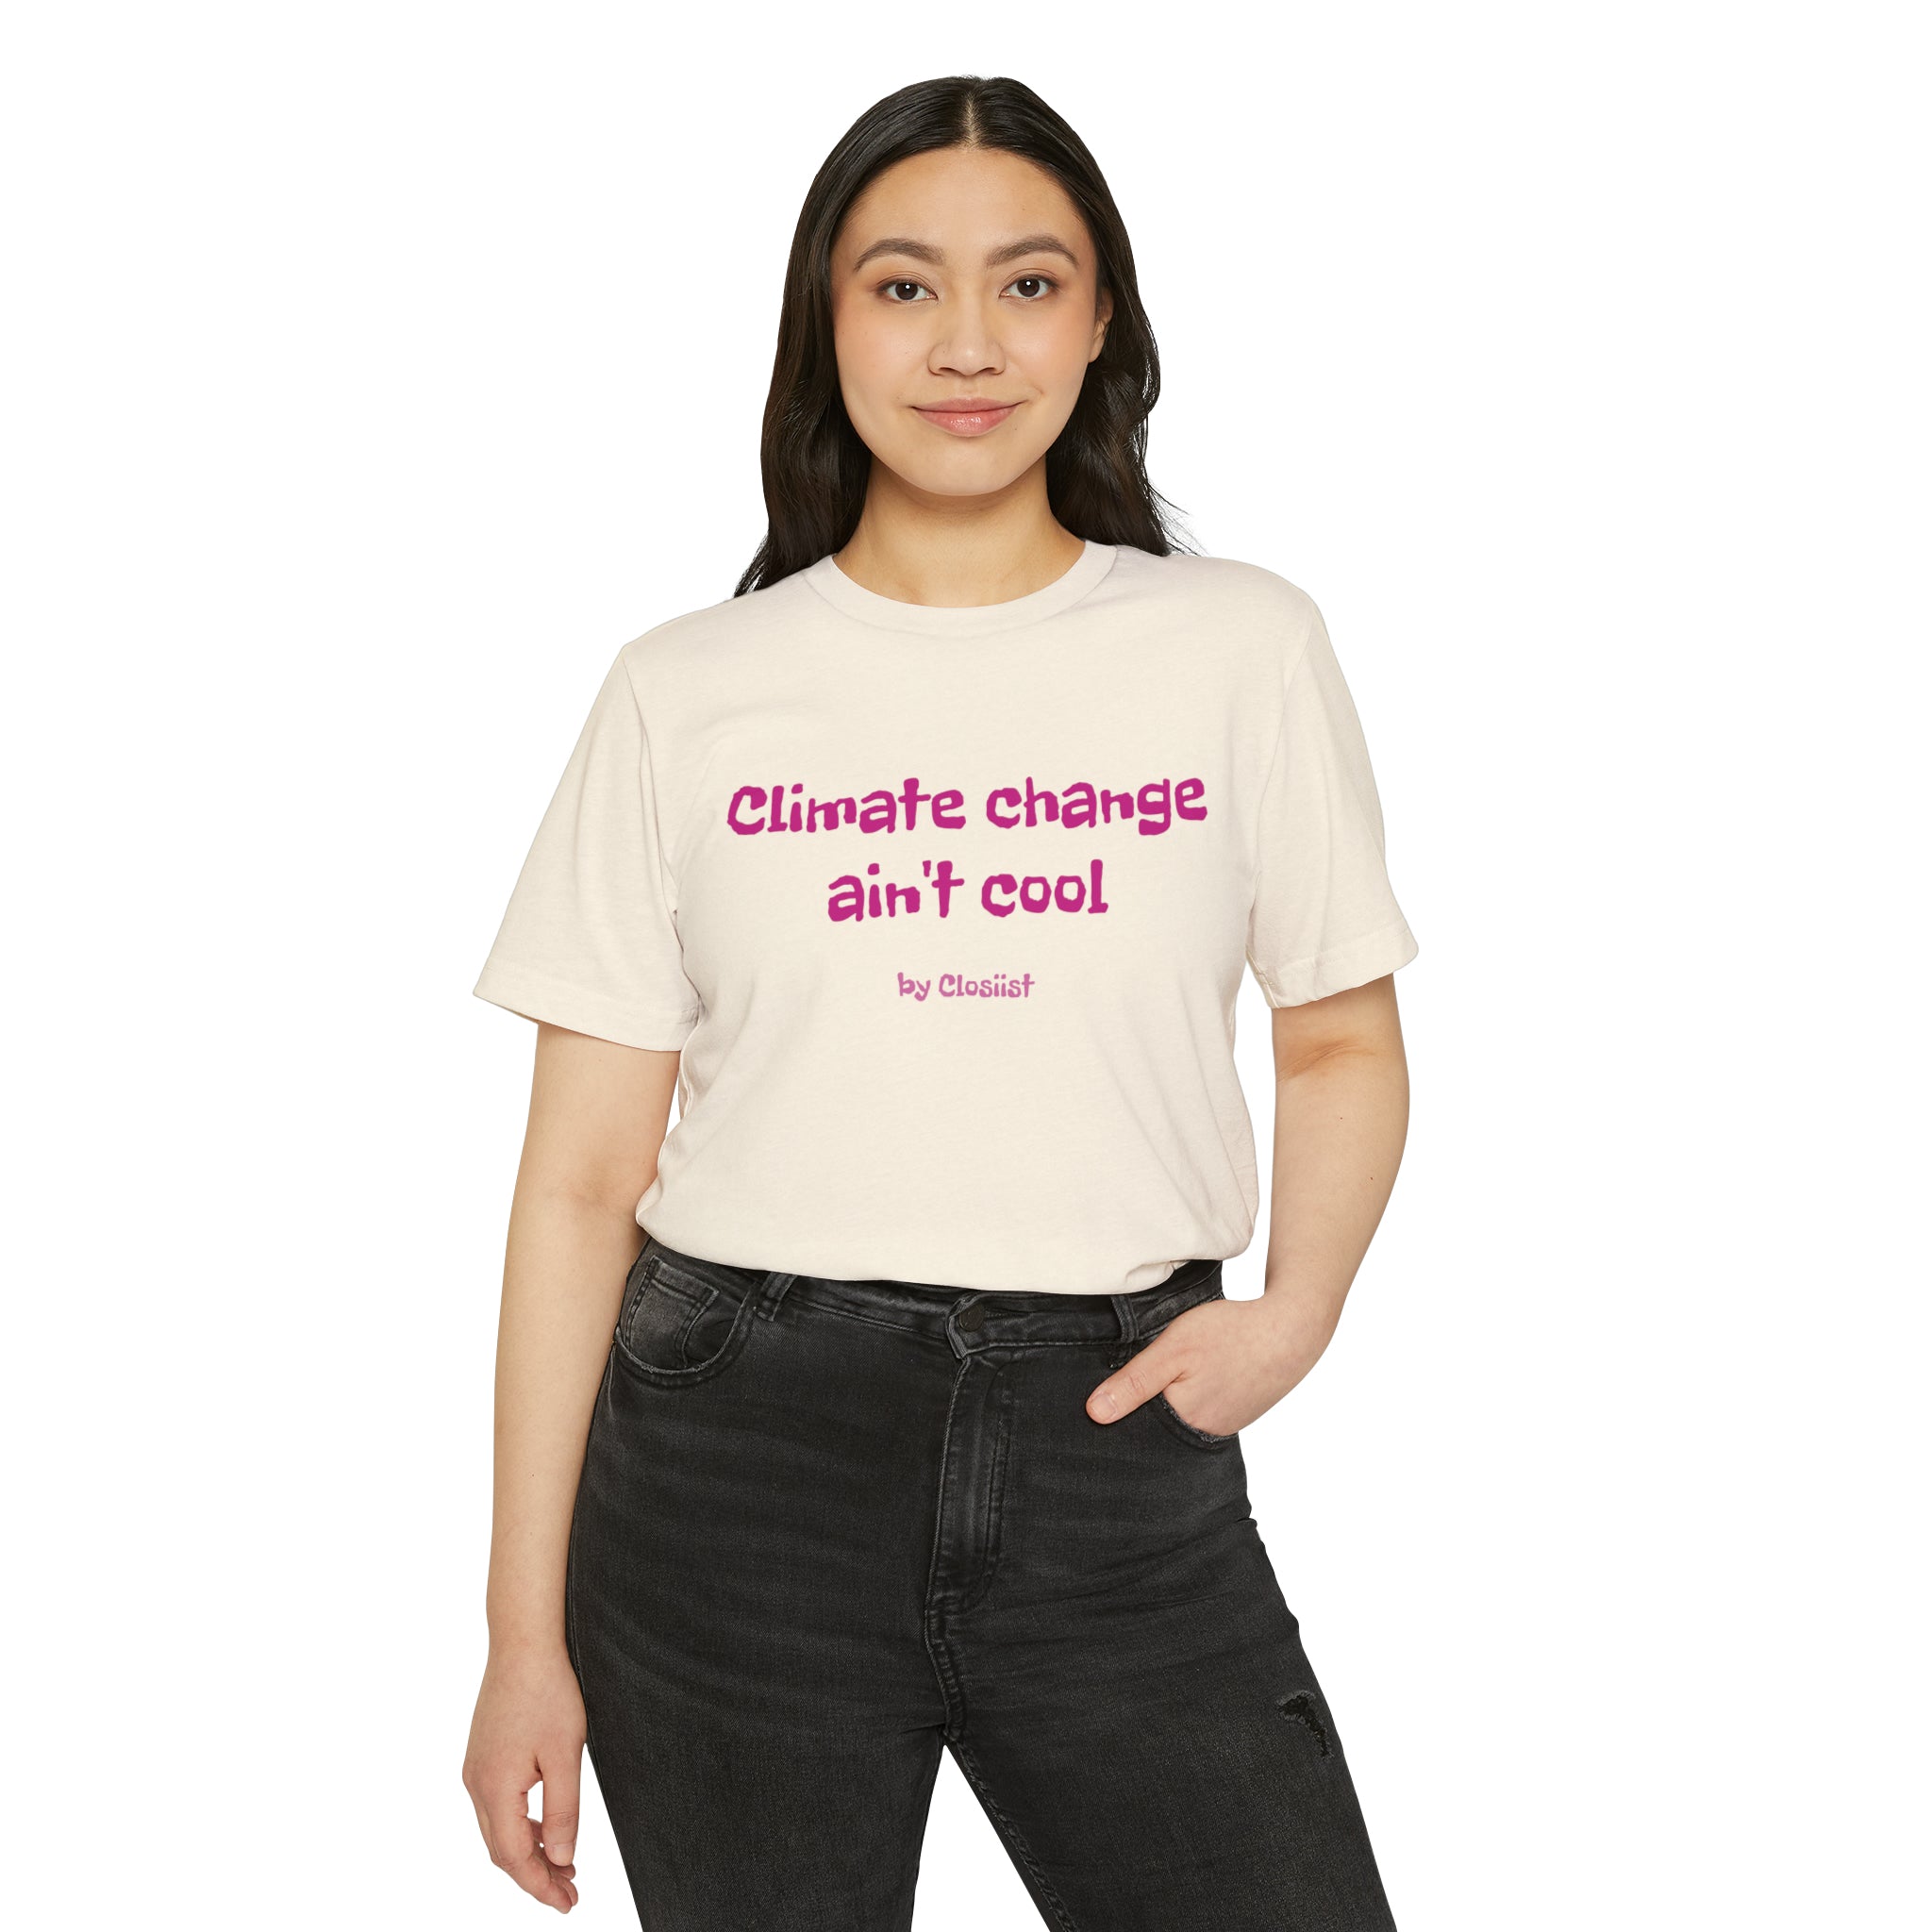 Make a bold statement & fight climate change with our stylish 